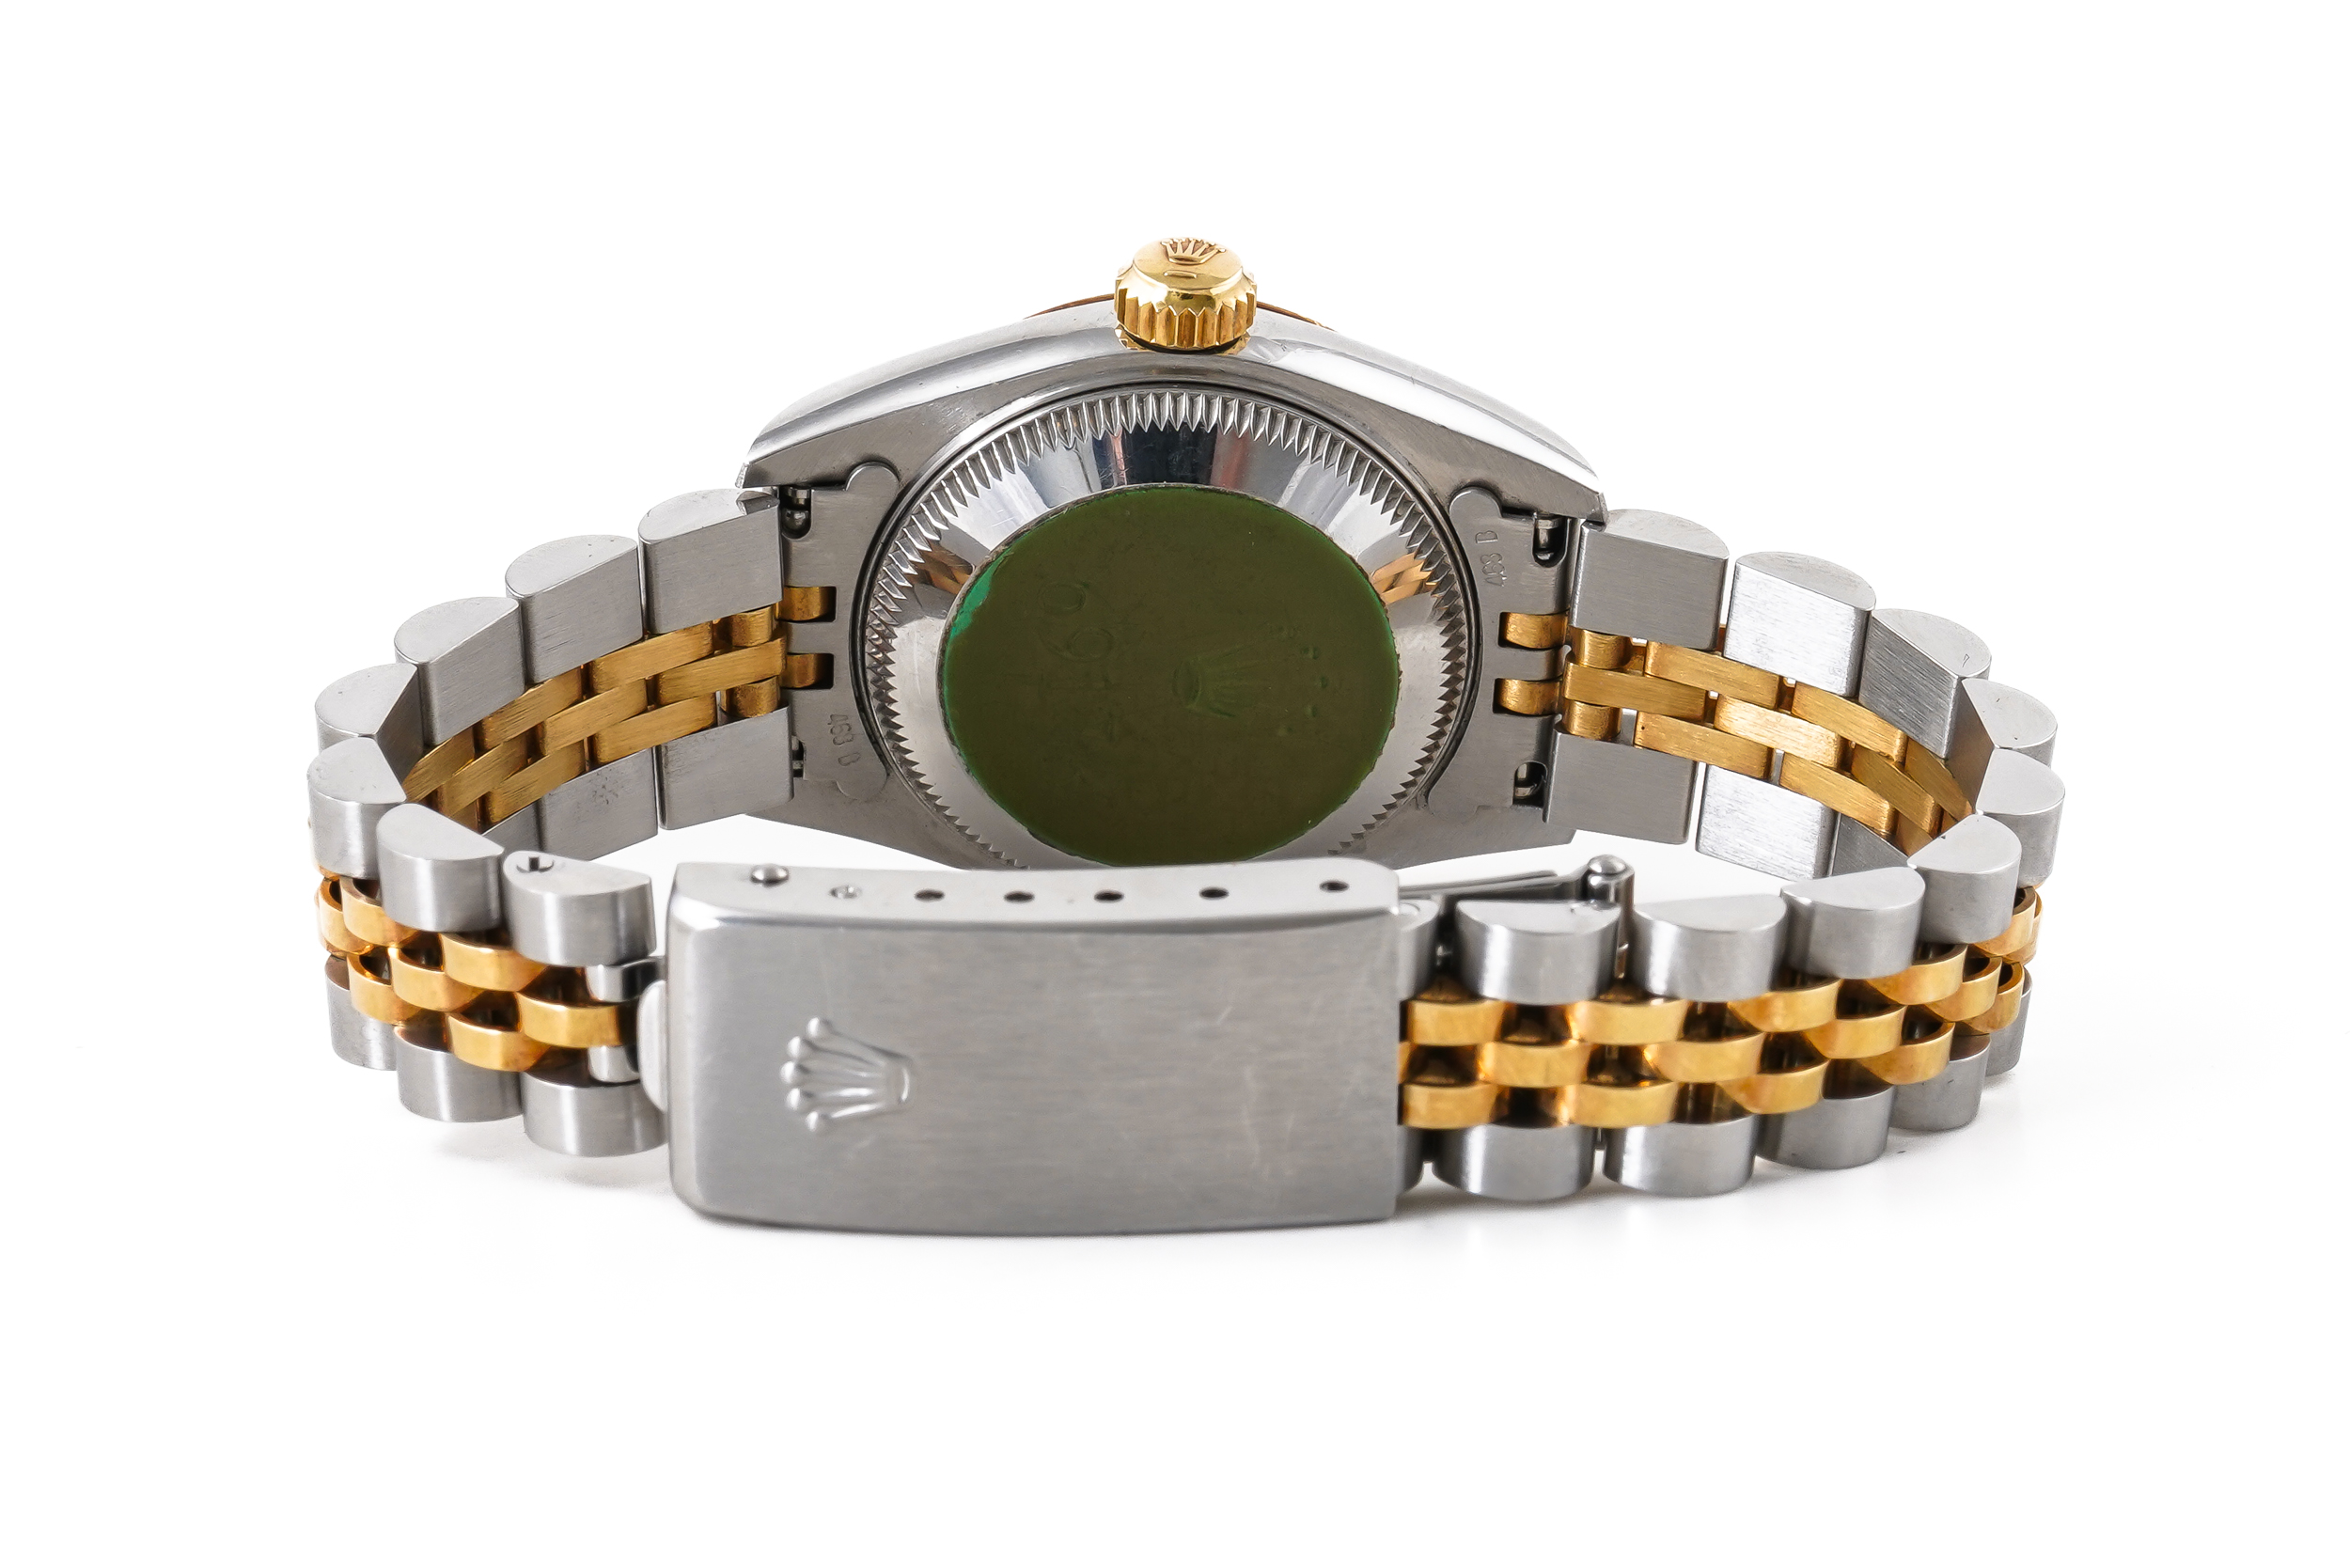 A LADY'S STEEL AND GOLD DATEJUST ROLEX WRISTWATCH - Image 5 of 6